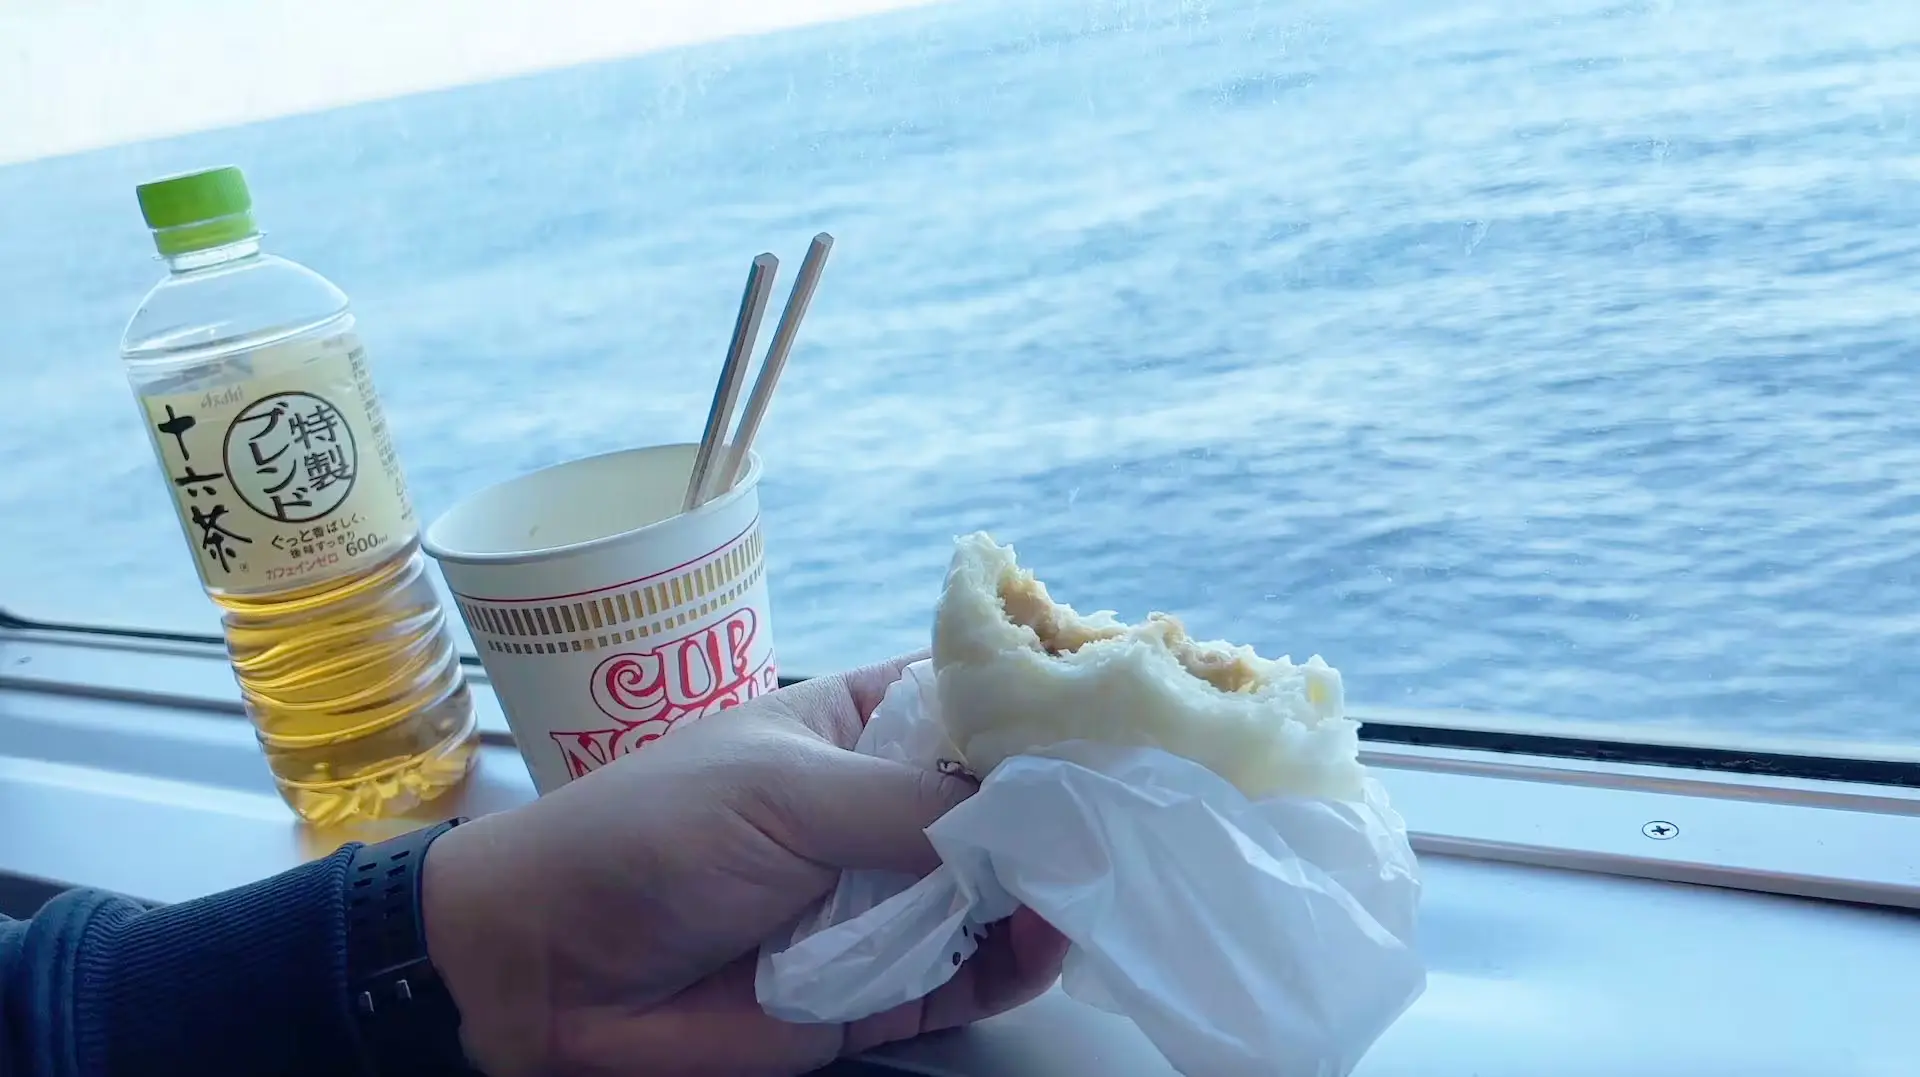 Eating cup noodles purchased on board the Oki Kisen Ferry in a special cabin